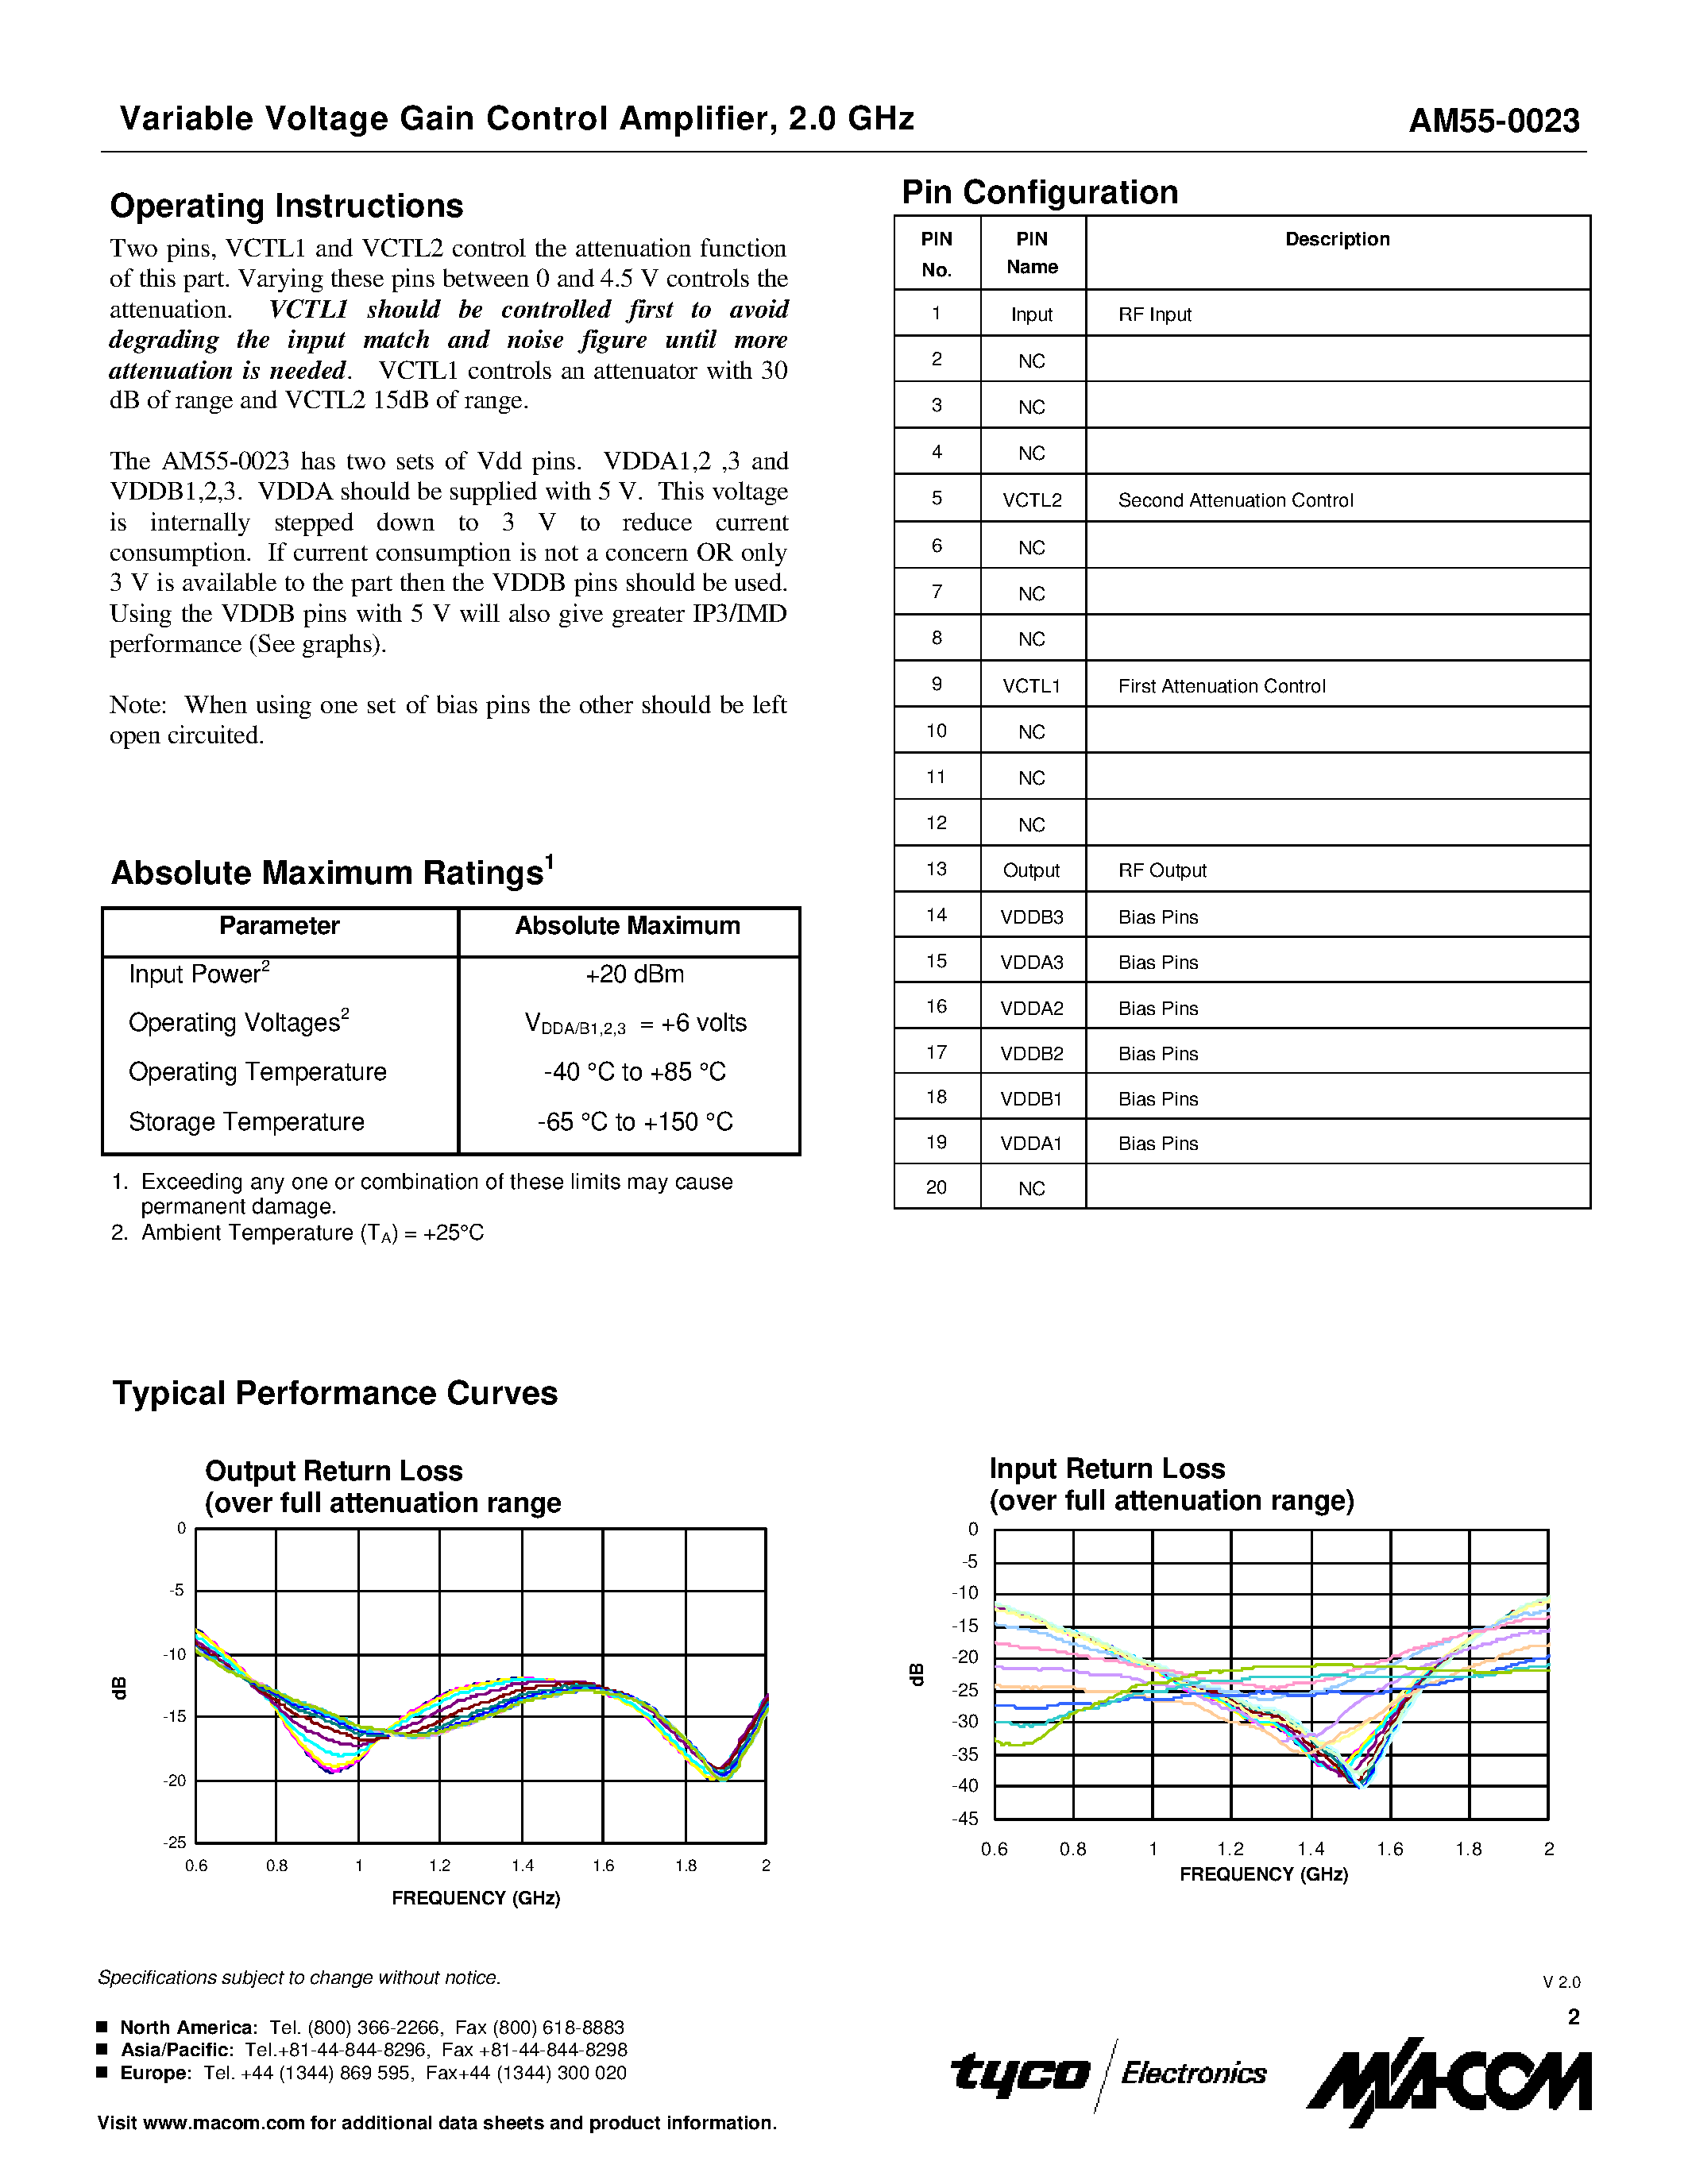 Datasheet AM55-0023SMB - Variable Voltage Gain Control Amplifier 0.8 - 2.0 GHz page 2